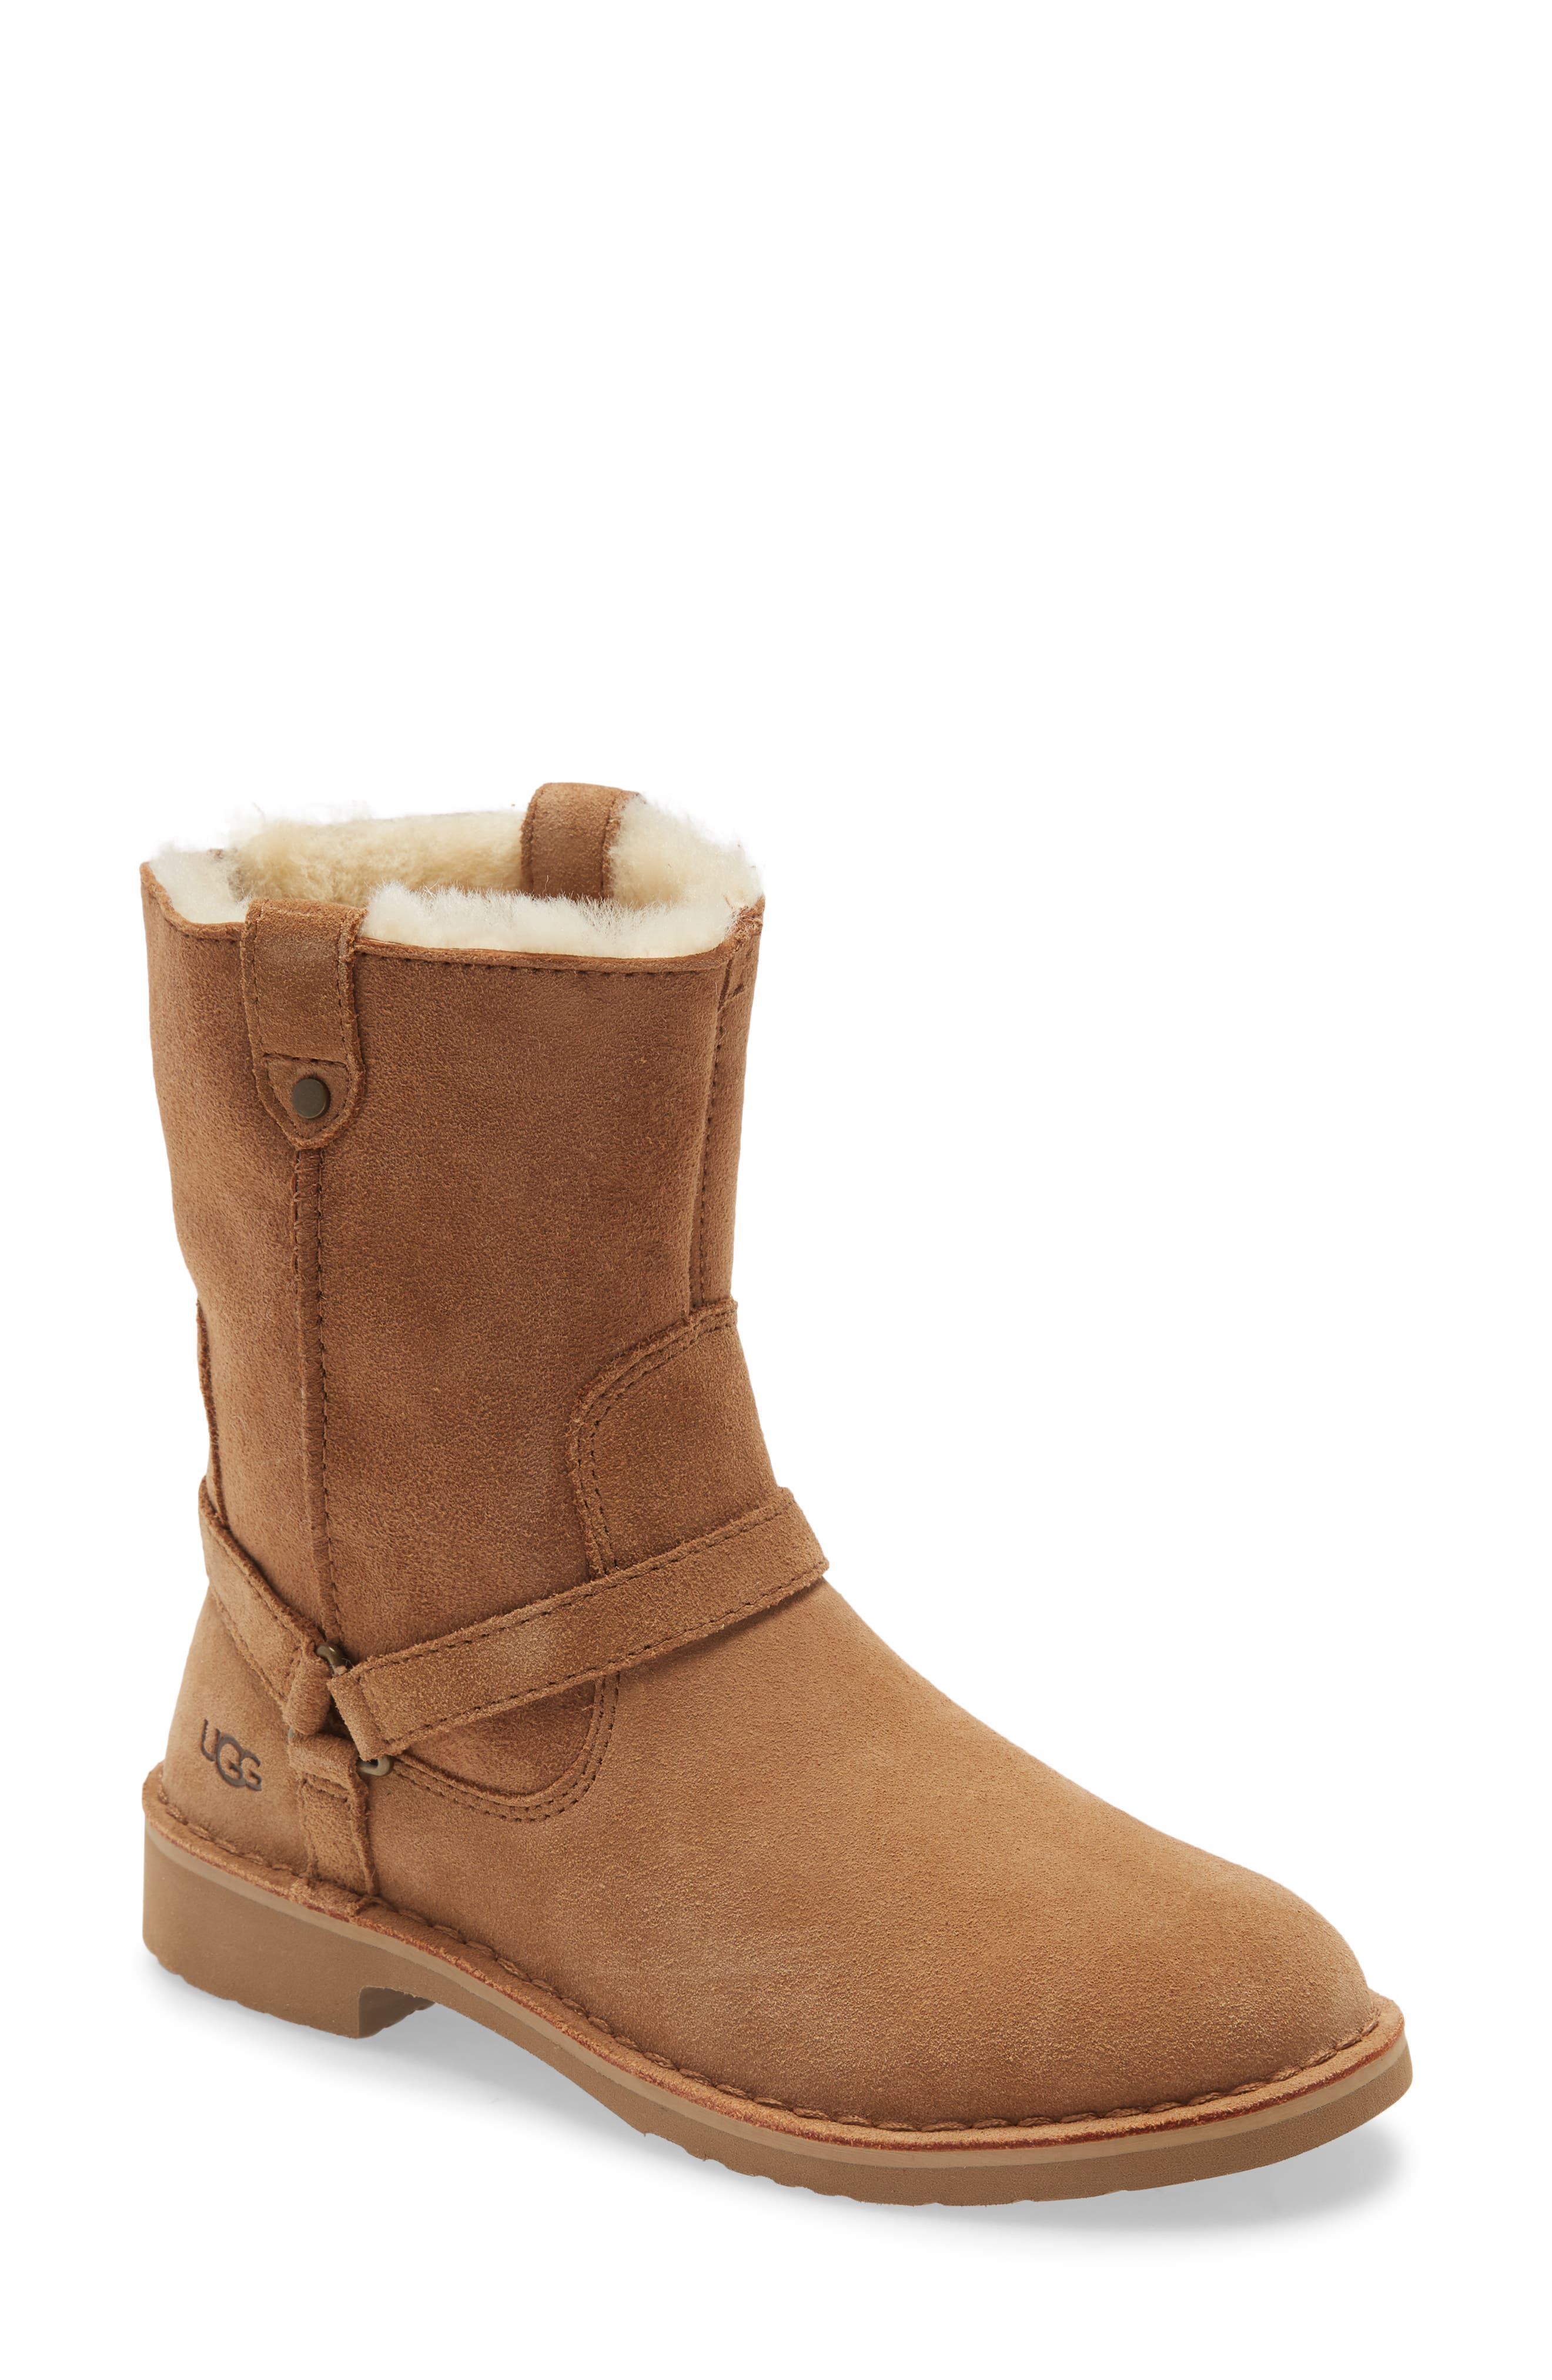 nordstrom shoes uggs boots